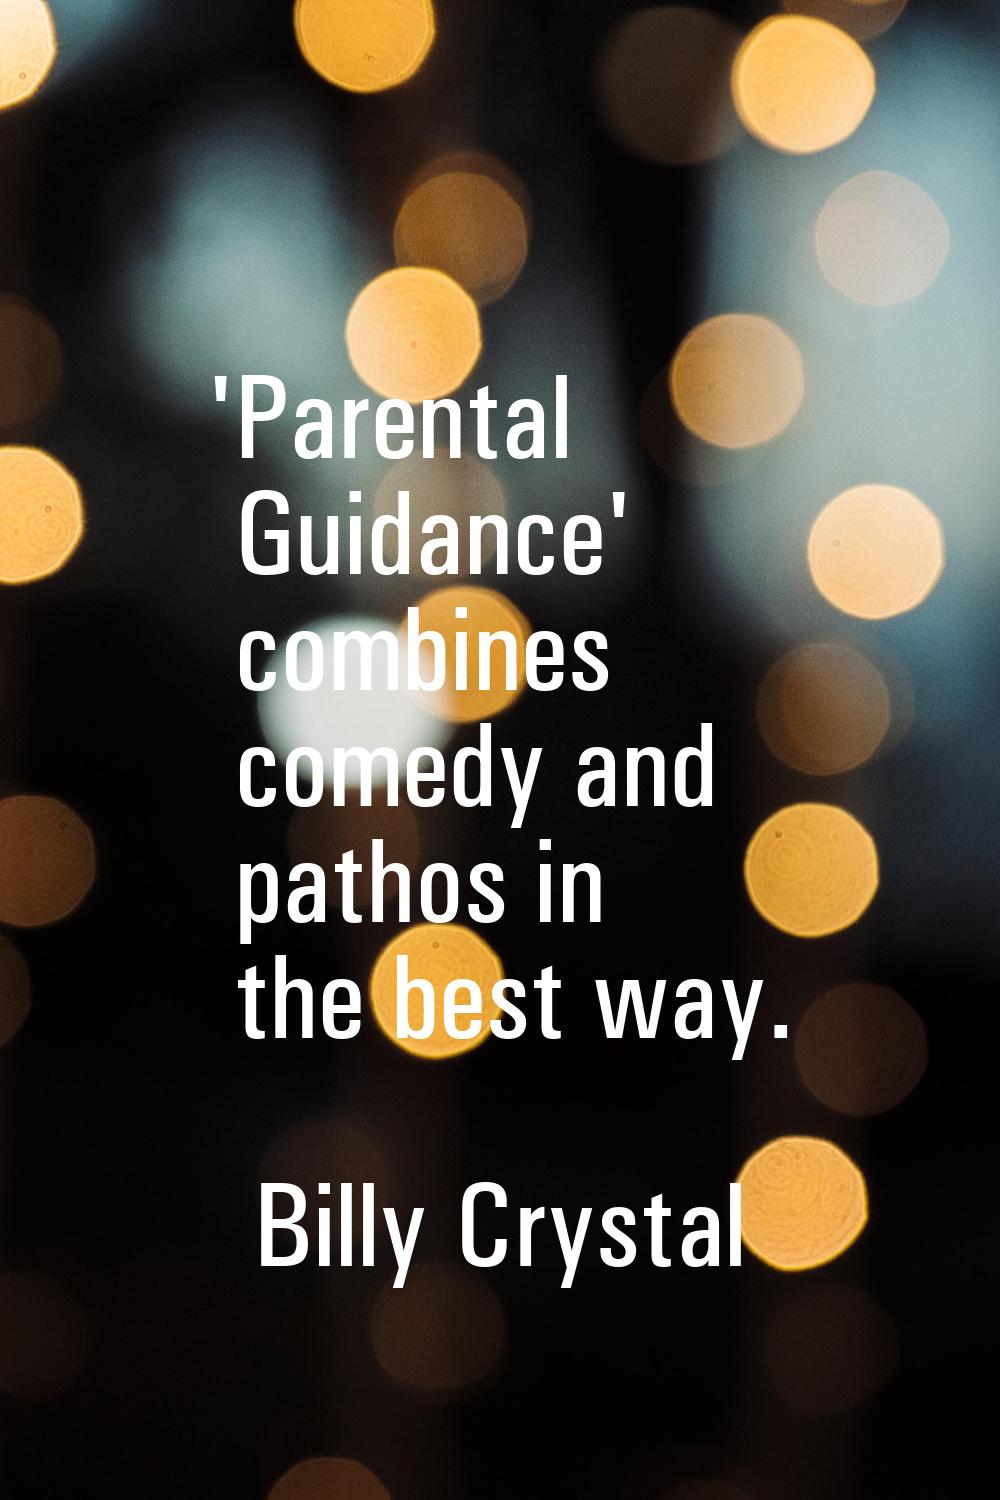 'Parental Guidance' combines comedy and pathos in the best way.